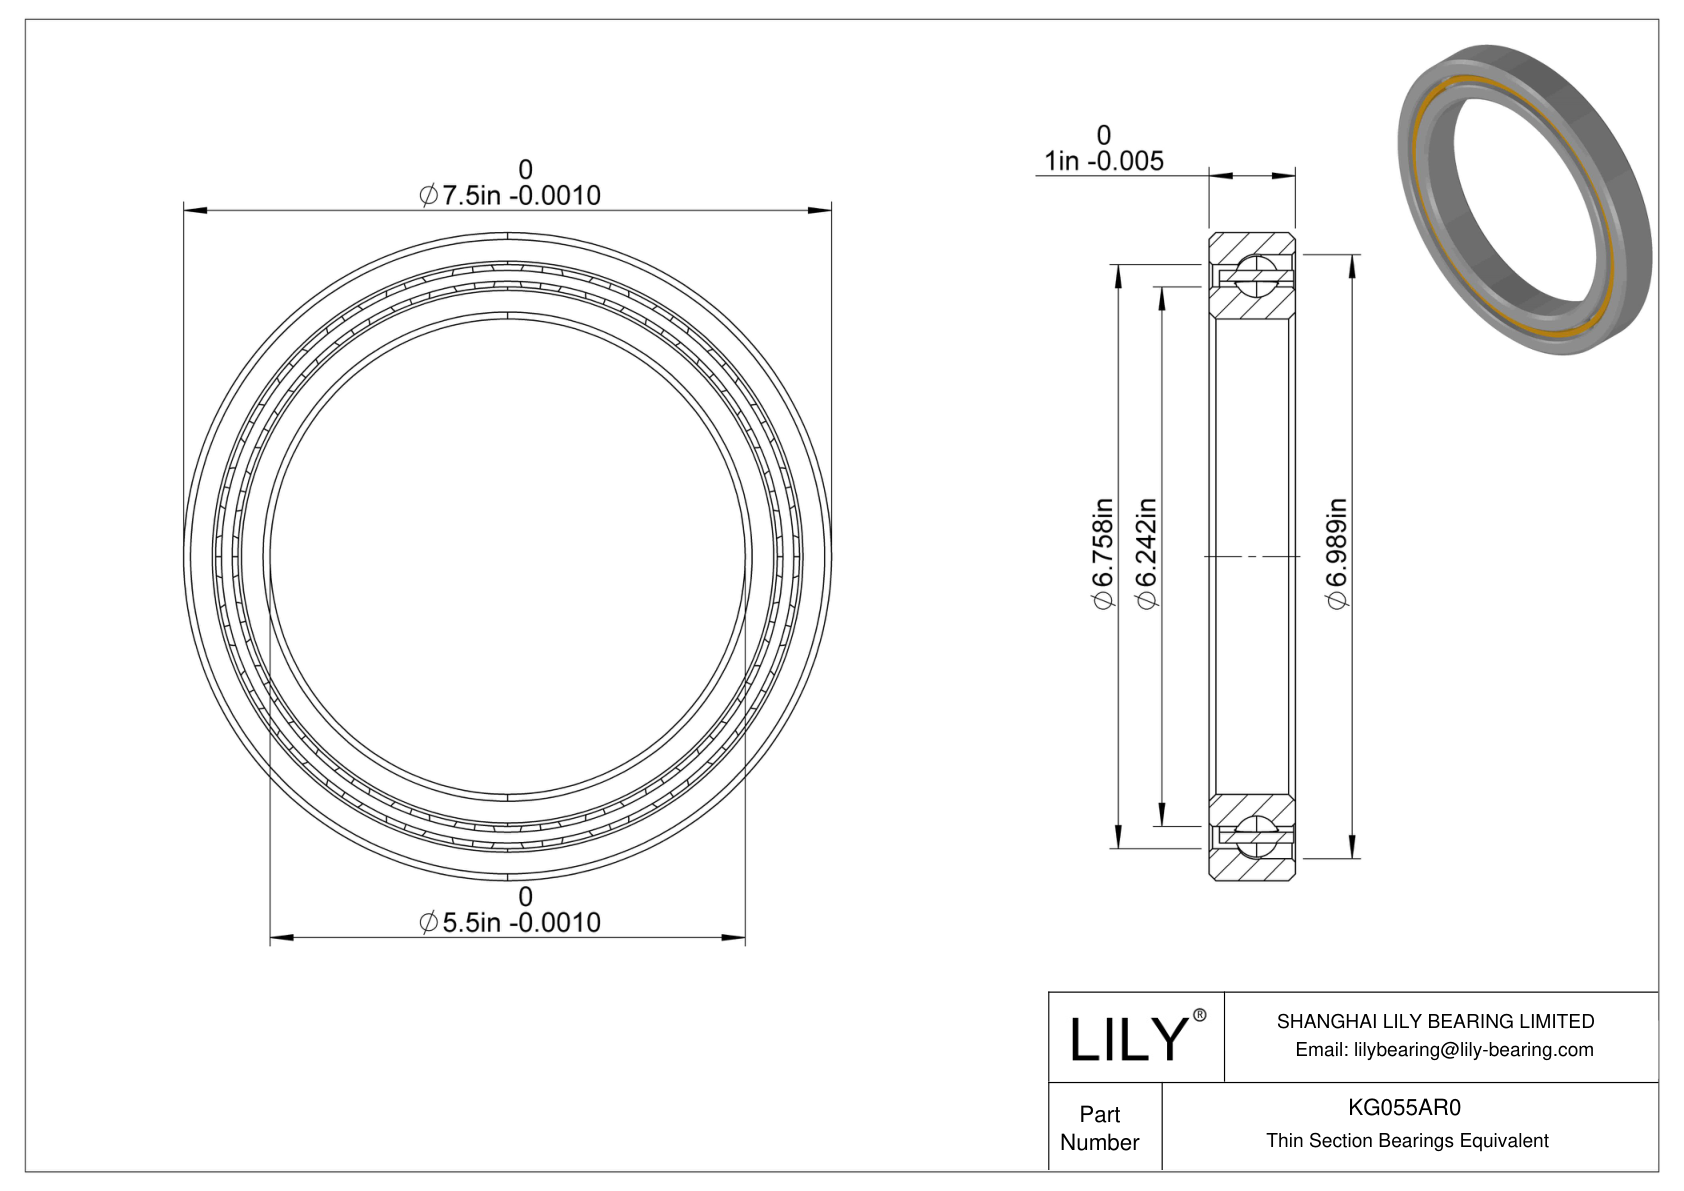 KG055AR0 Constant Section (CS) Bearings cad drawing